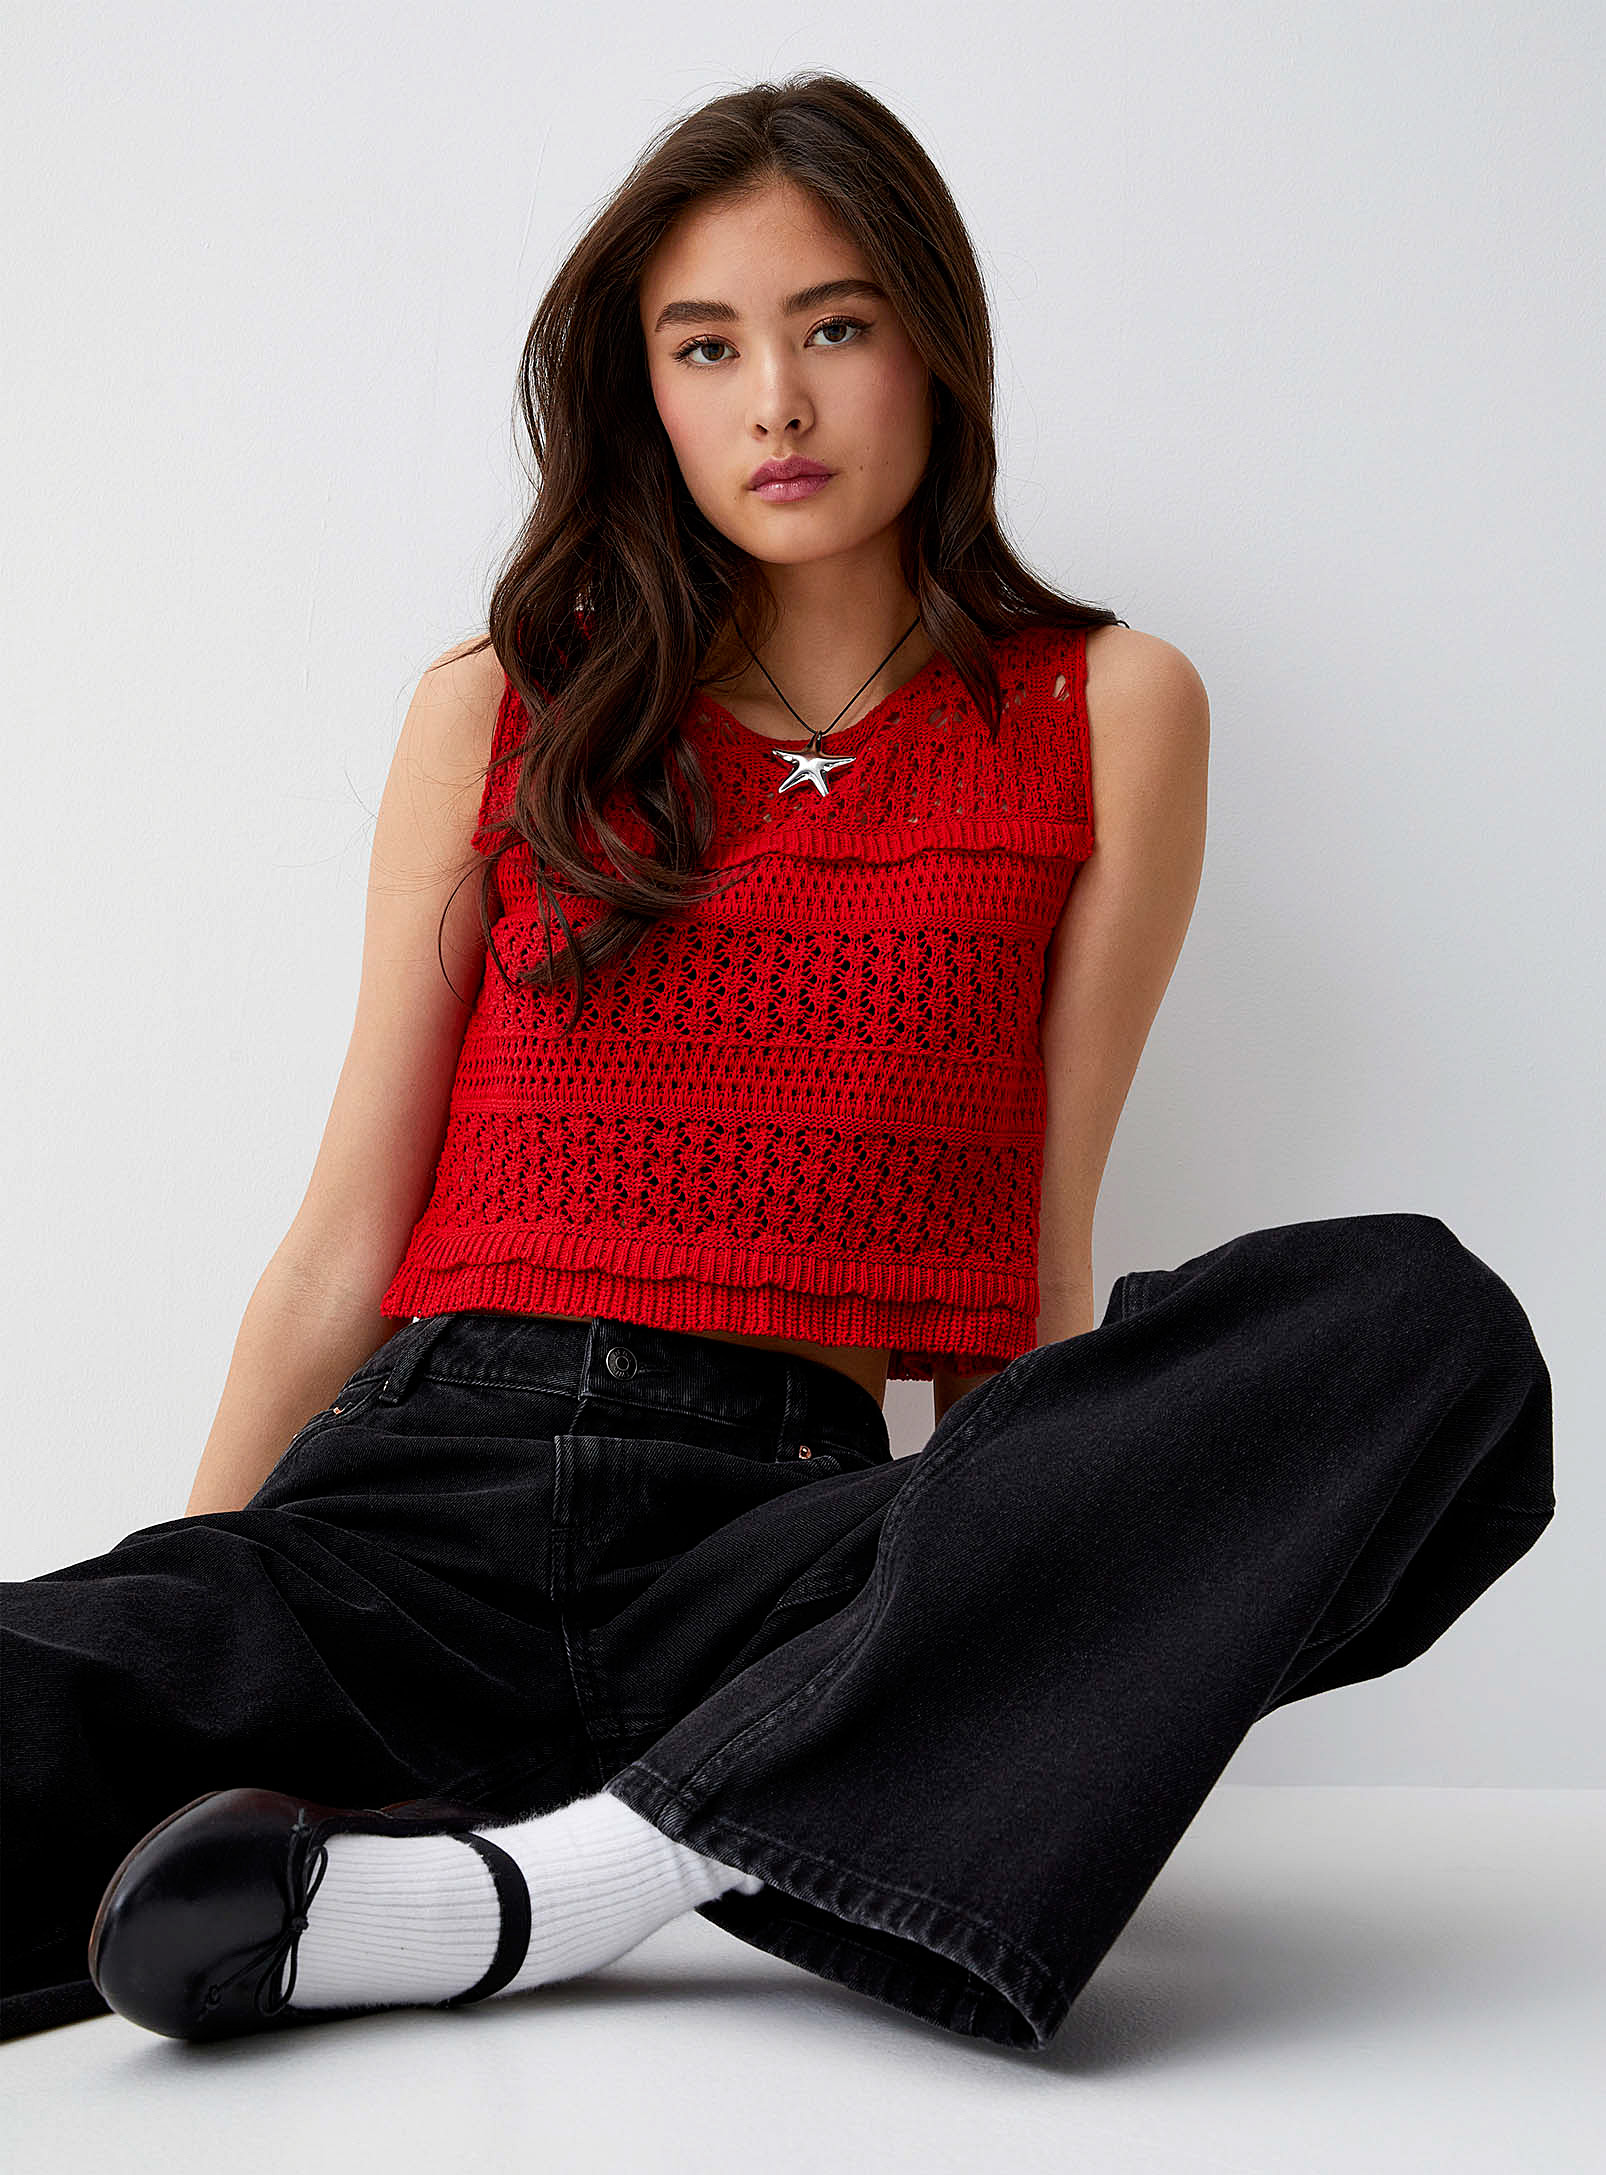 Twik Crocheted Cropped Cami In Black